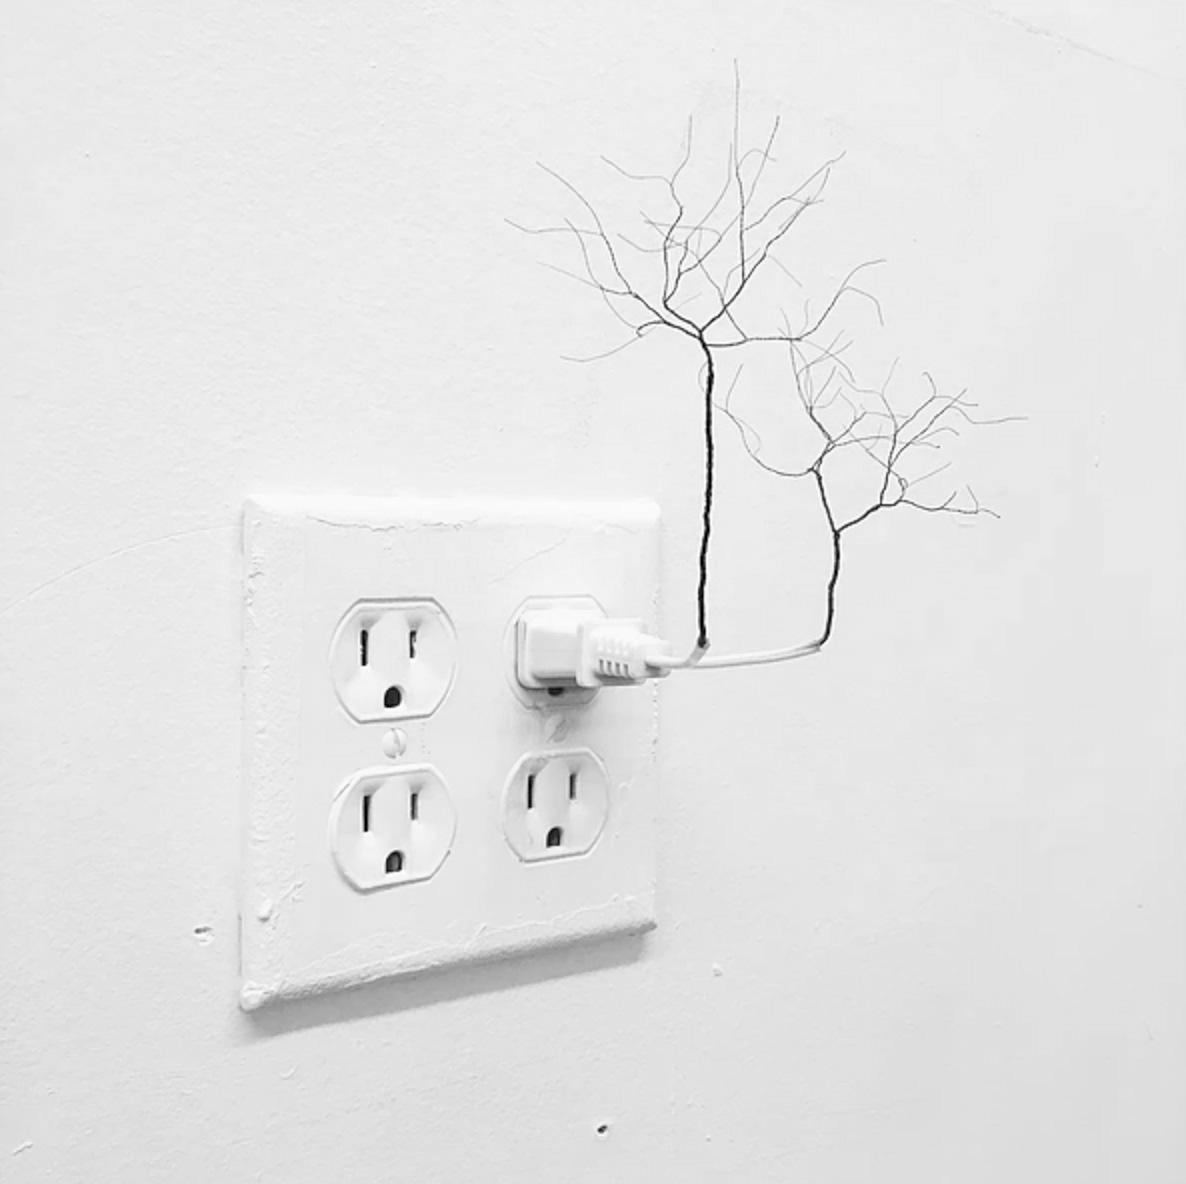 The Apotheosis Of The Fish Market Socket Branch
2016
Wire, Found plug
7.5 x 5 x 5 inches 2016 Marc Straus Gallery